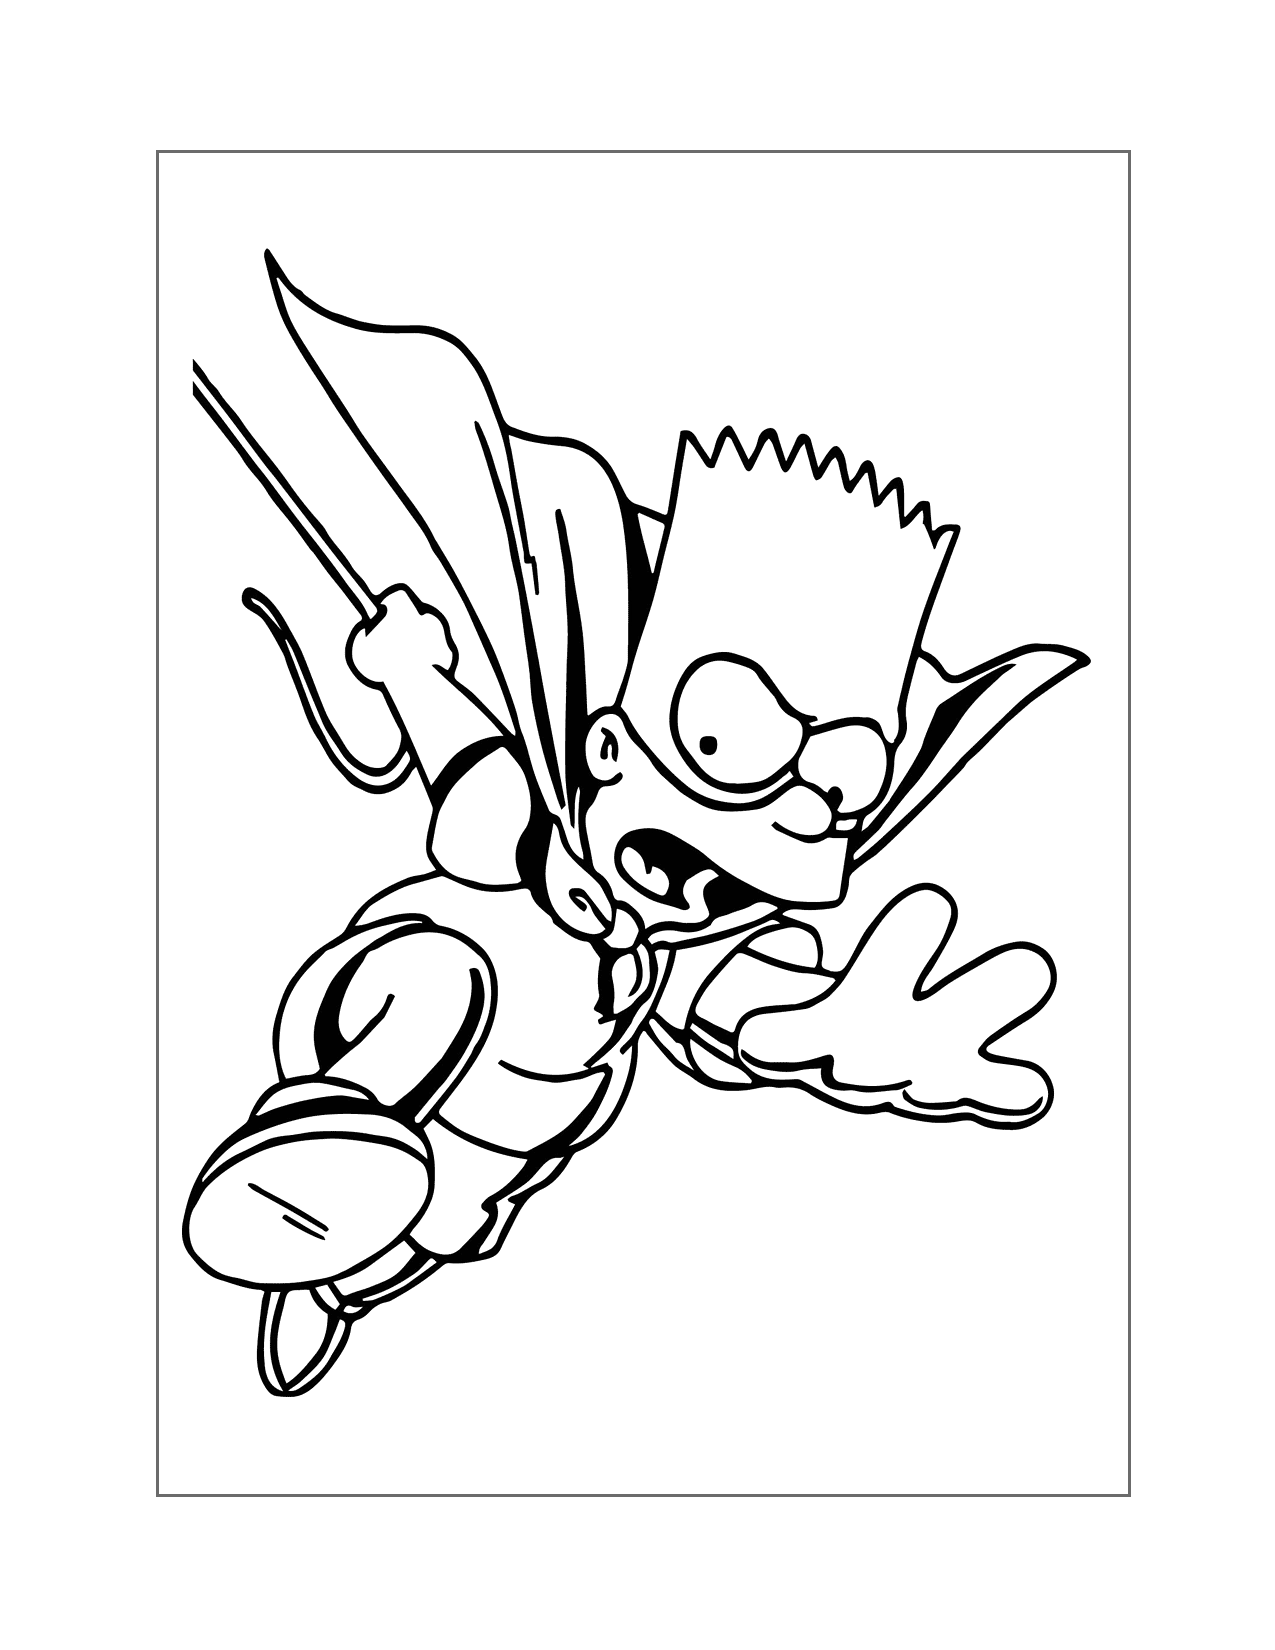 Super Bart Coloring Page